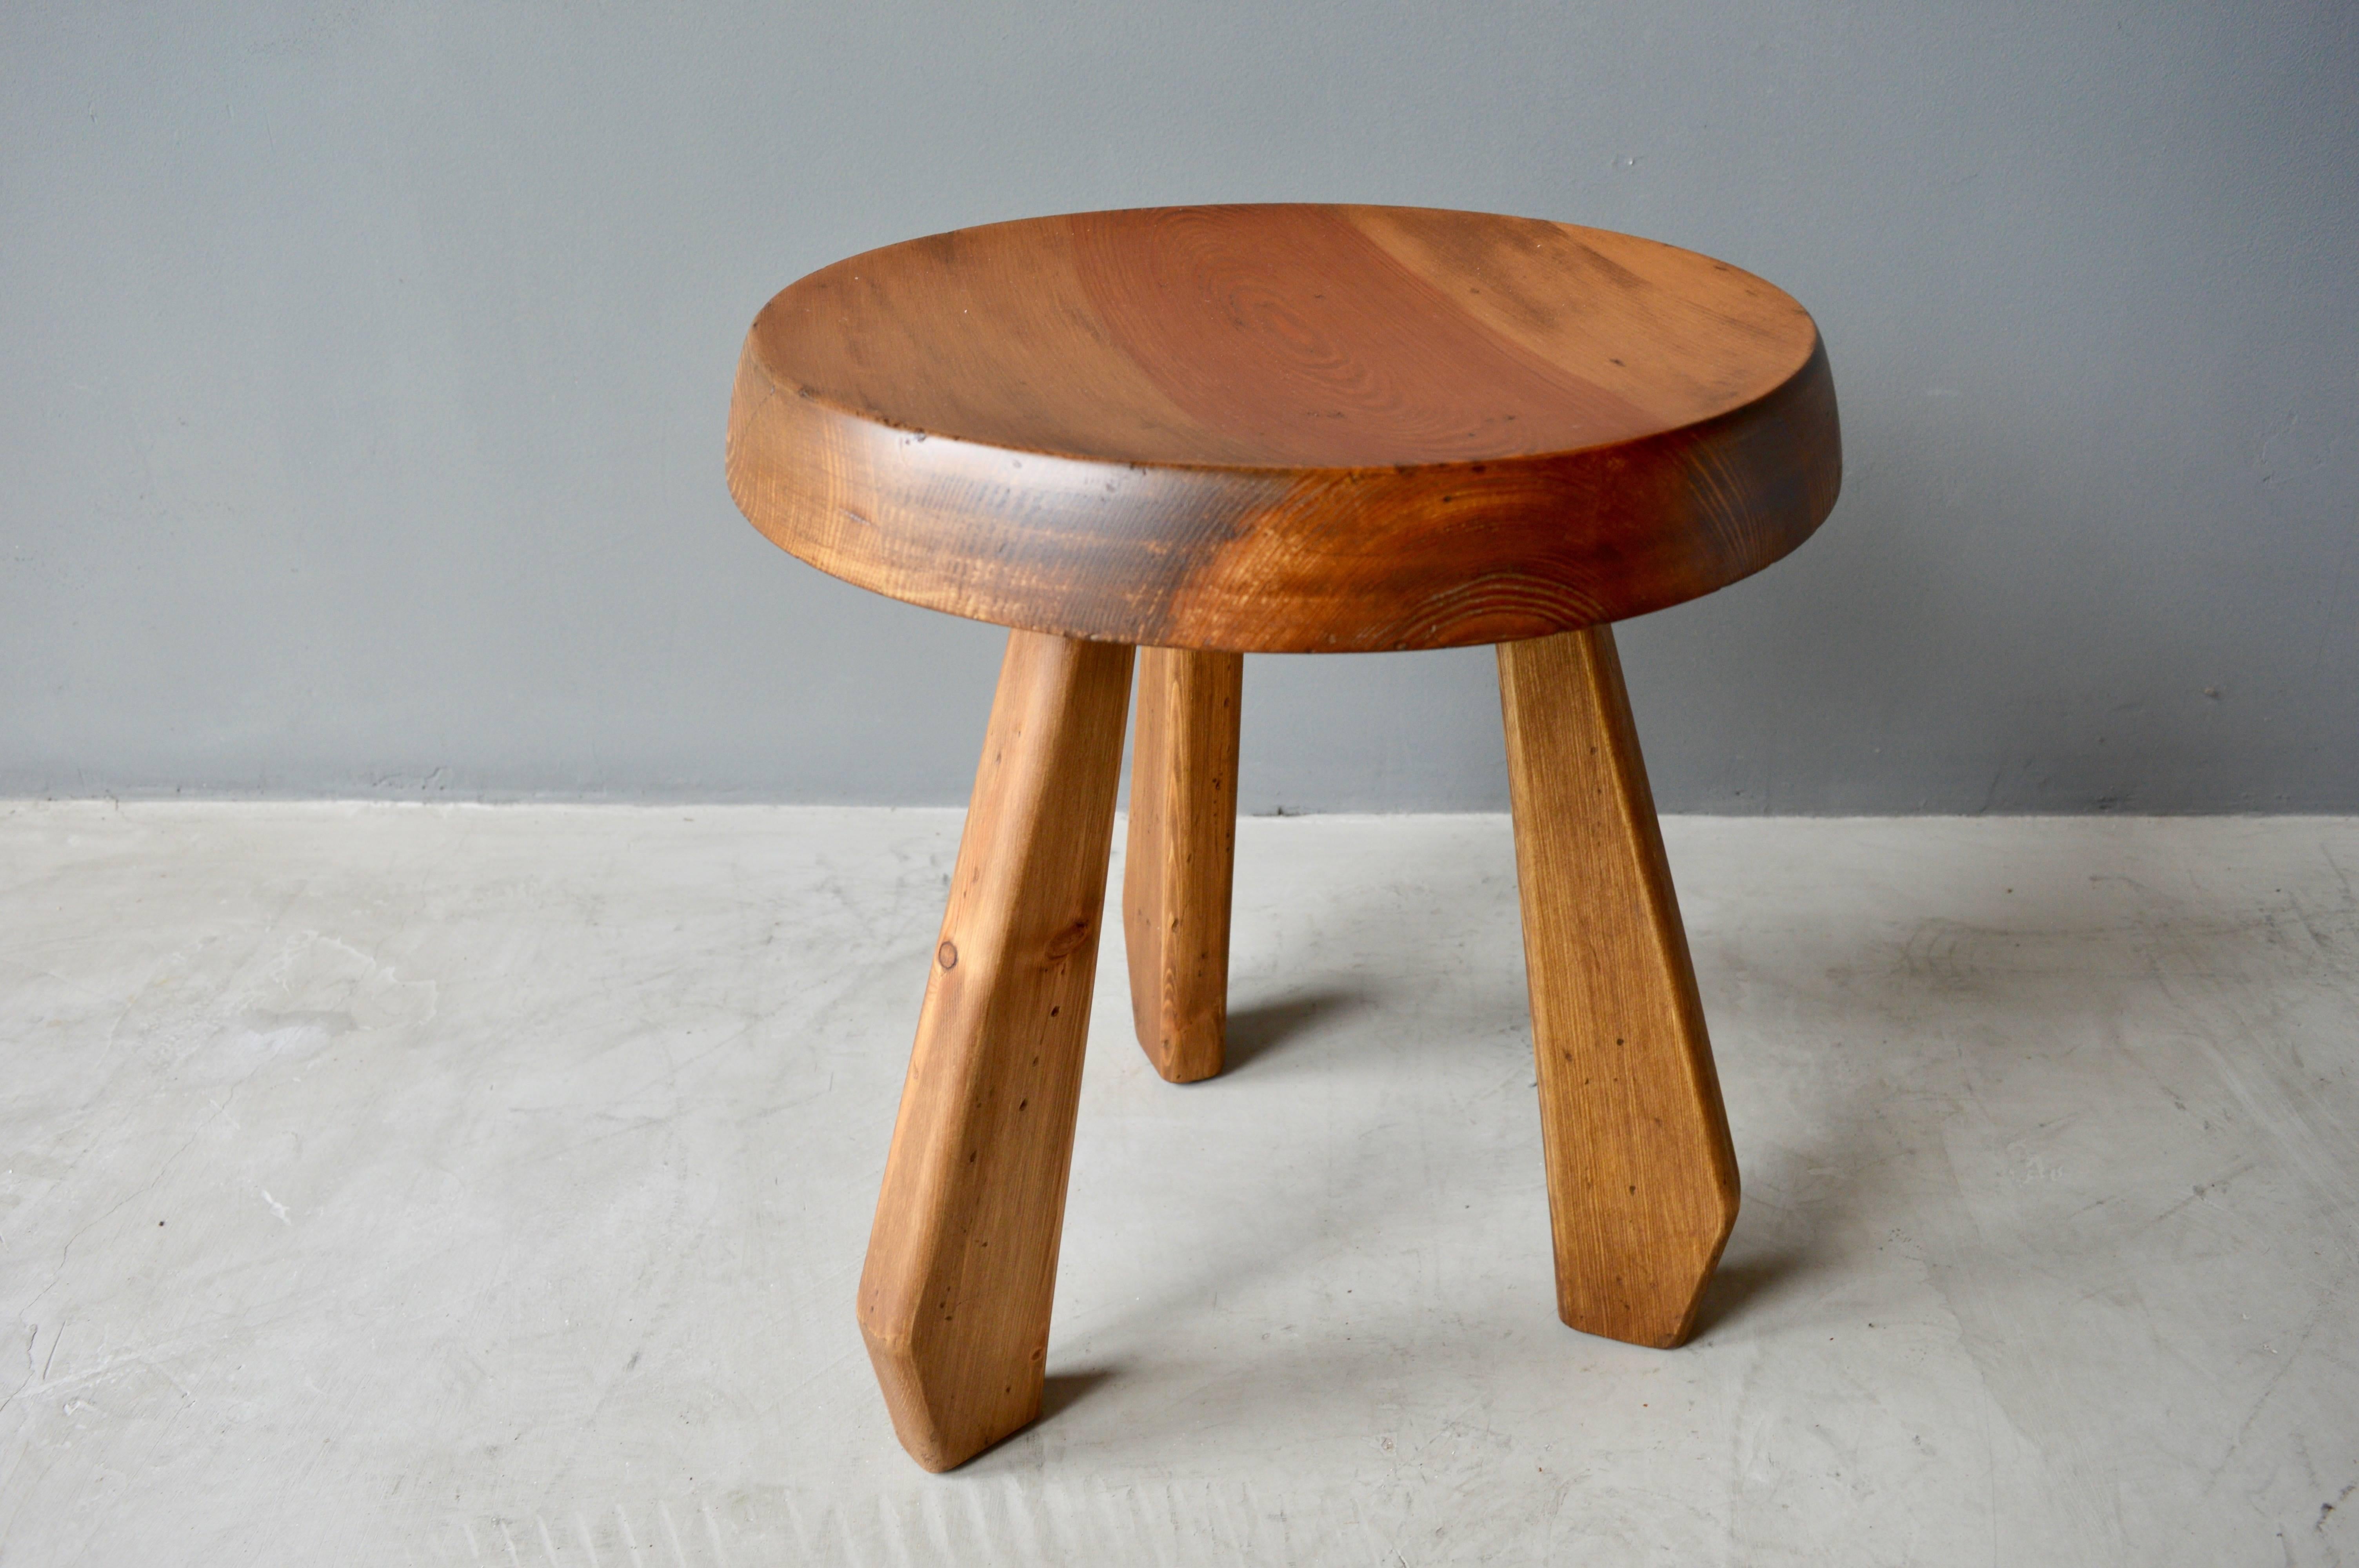 Stunning wood stool by Charlotte Perriand. Original condition. Exquisite design.